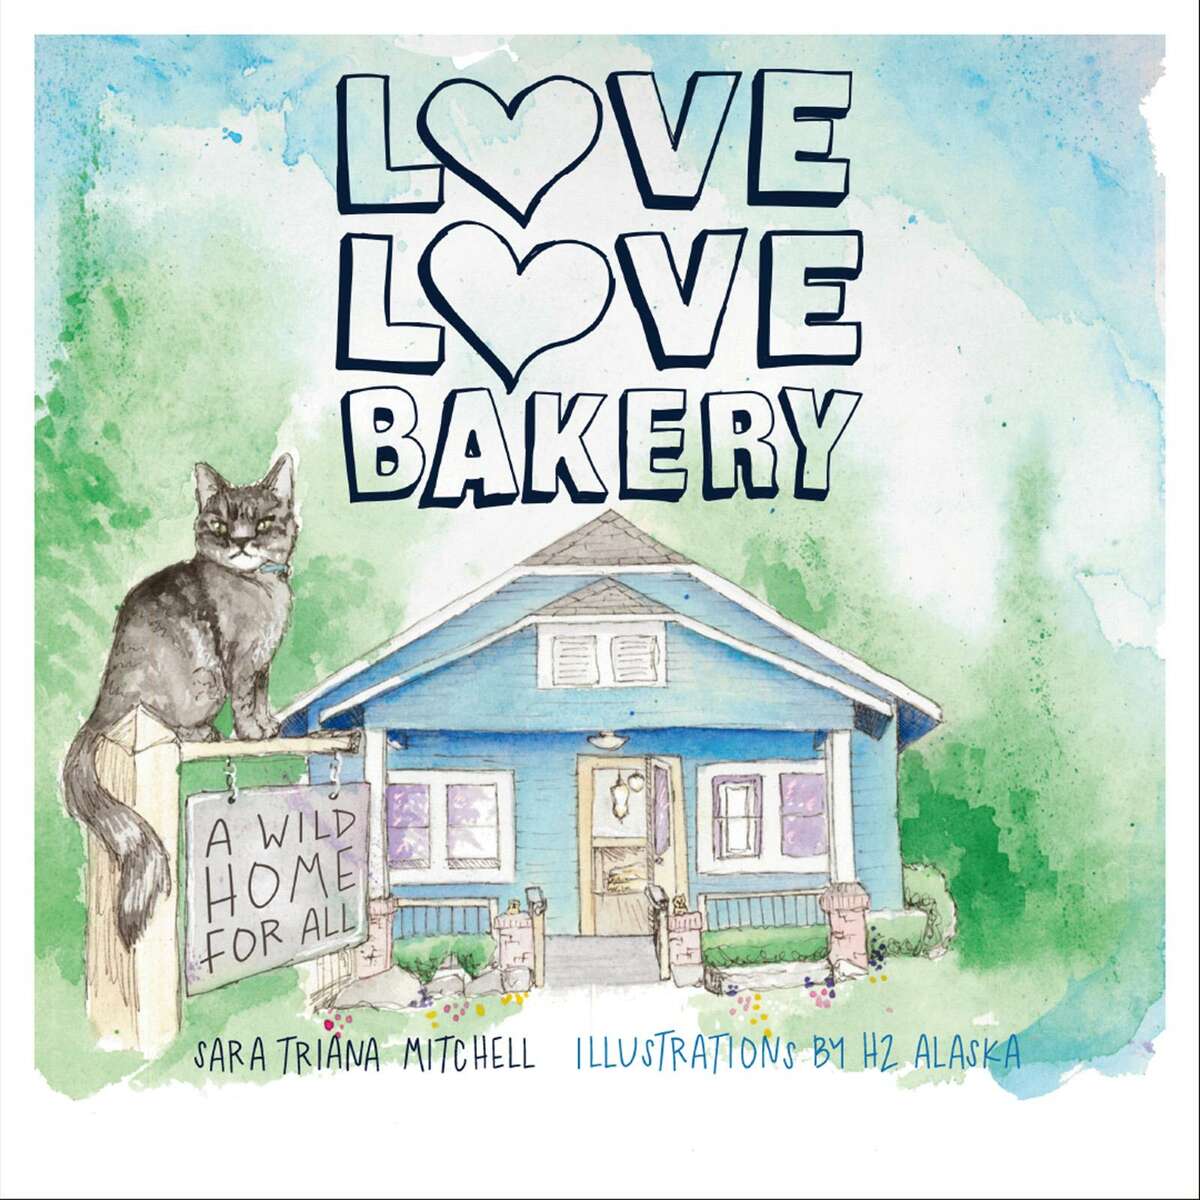 "Love Love Bakery" is a new children's book by Houston-area author Sarah Triana Mitchell and illustrator Hayley Haynes.